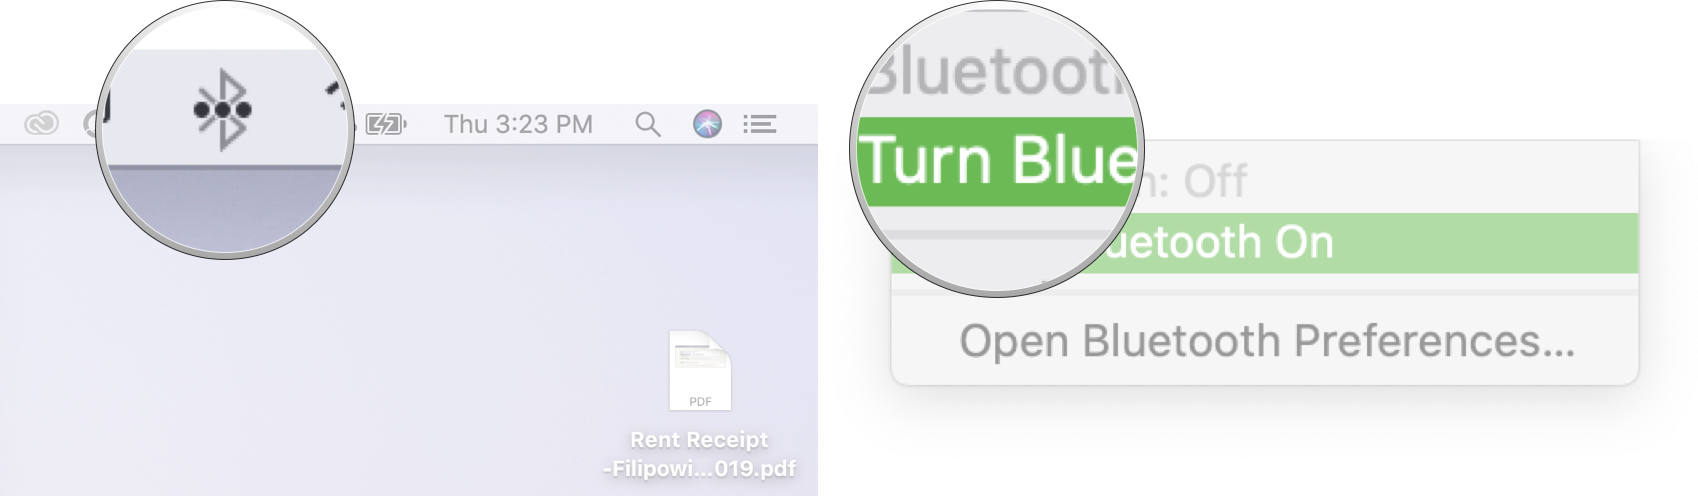 Turn on Bluetooth on Mac: Click the Bluetooth symbol in the menu bar and then click Turn on Bluetooth